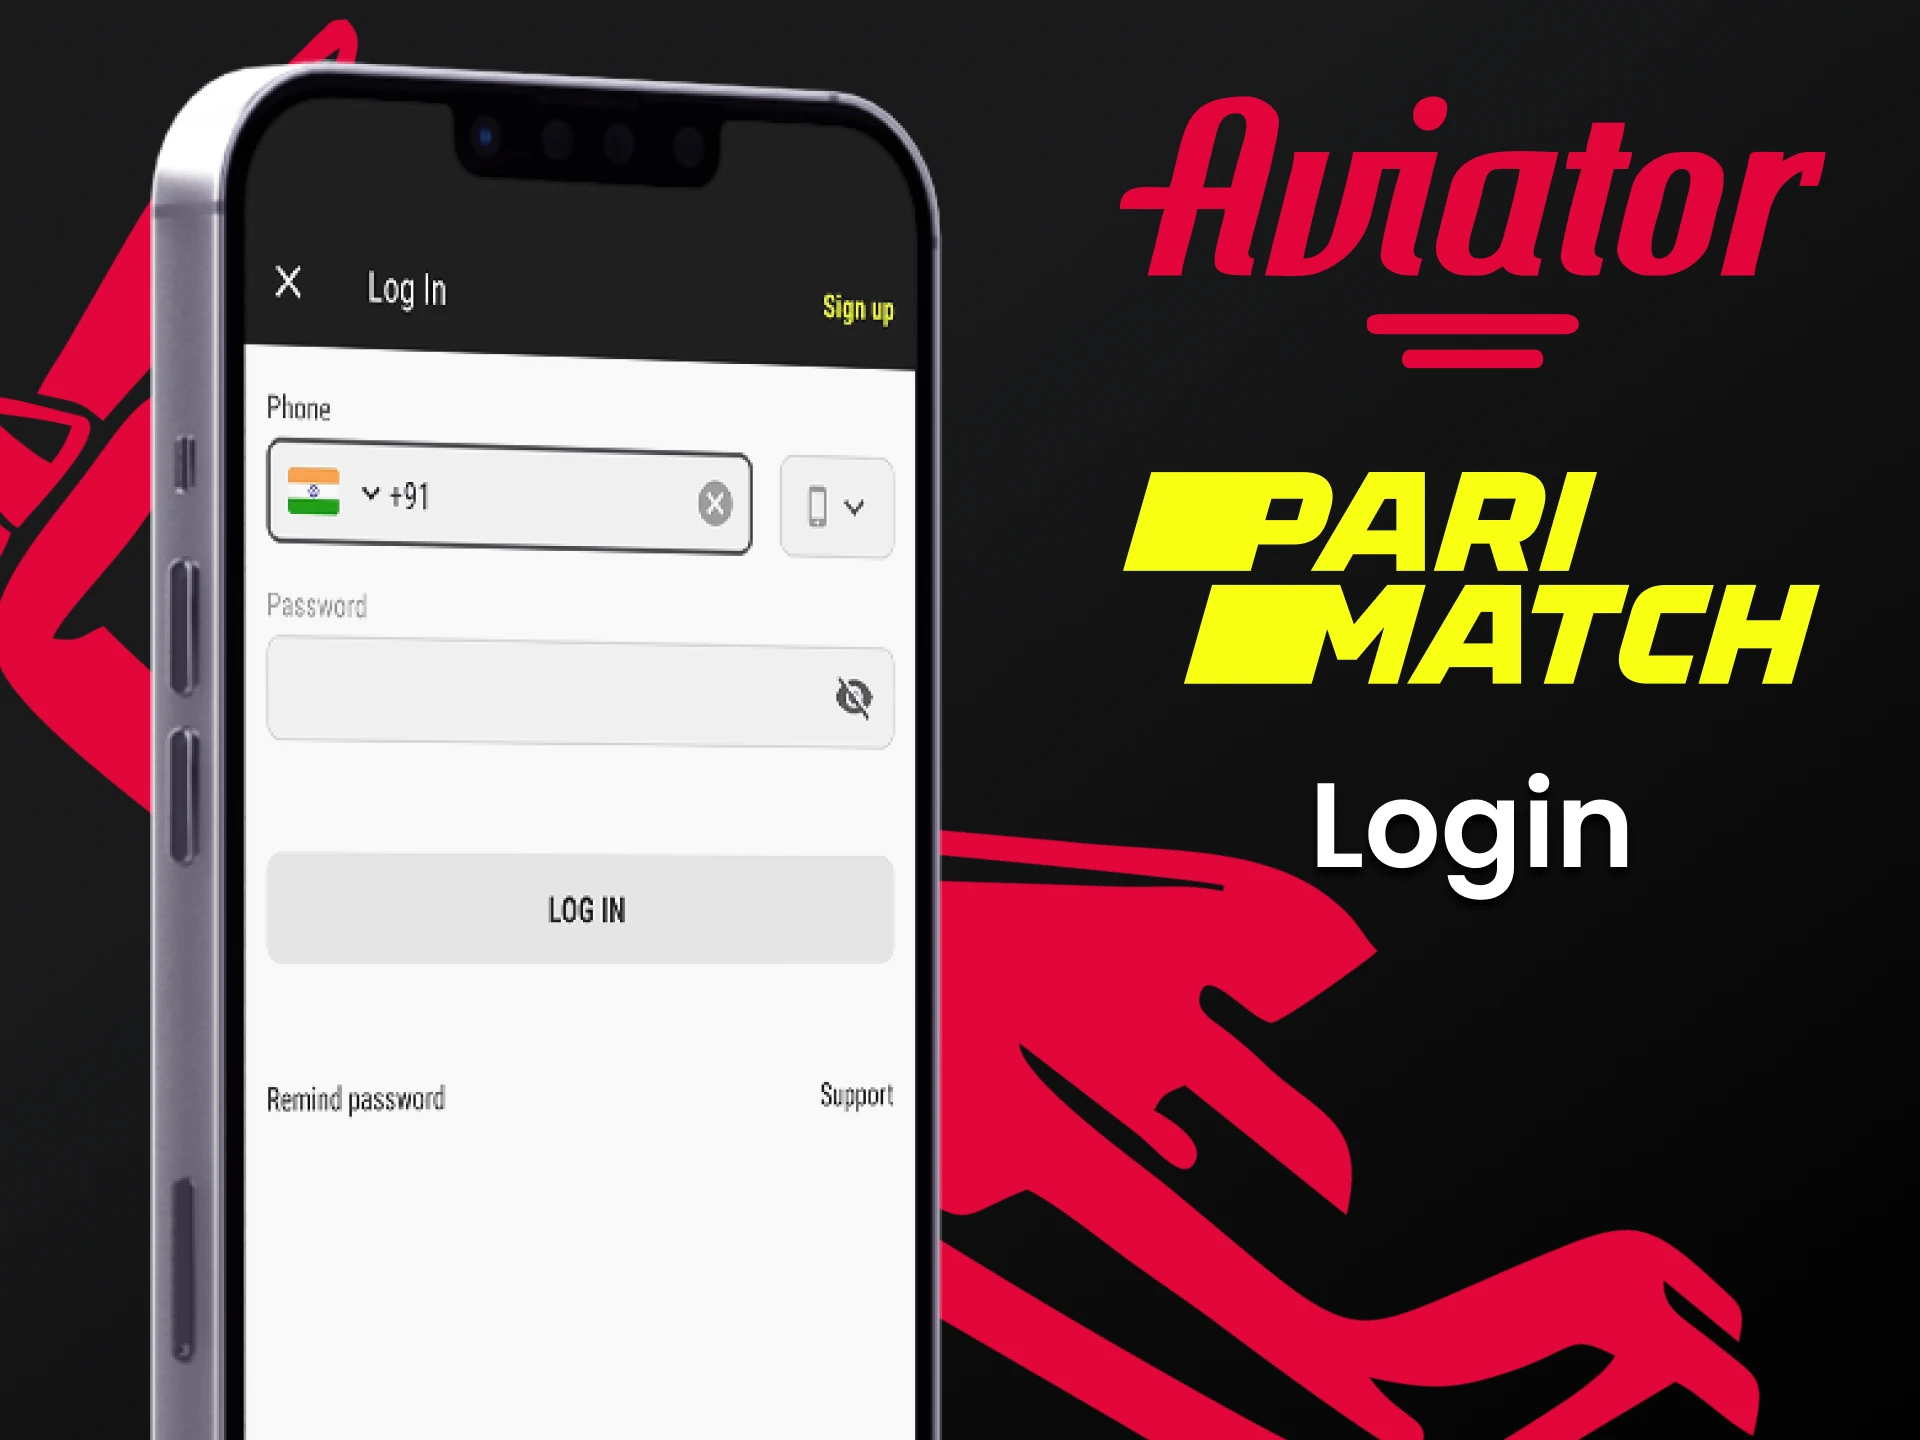 Use your Parimatch account to play Aviator.